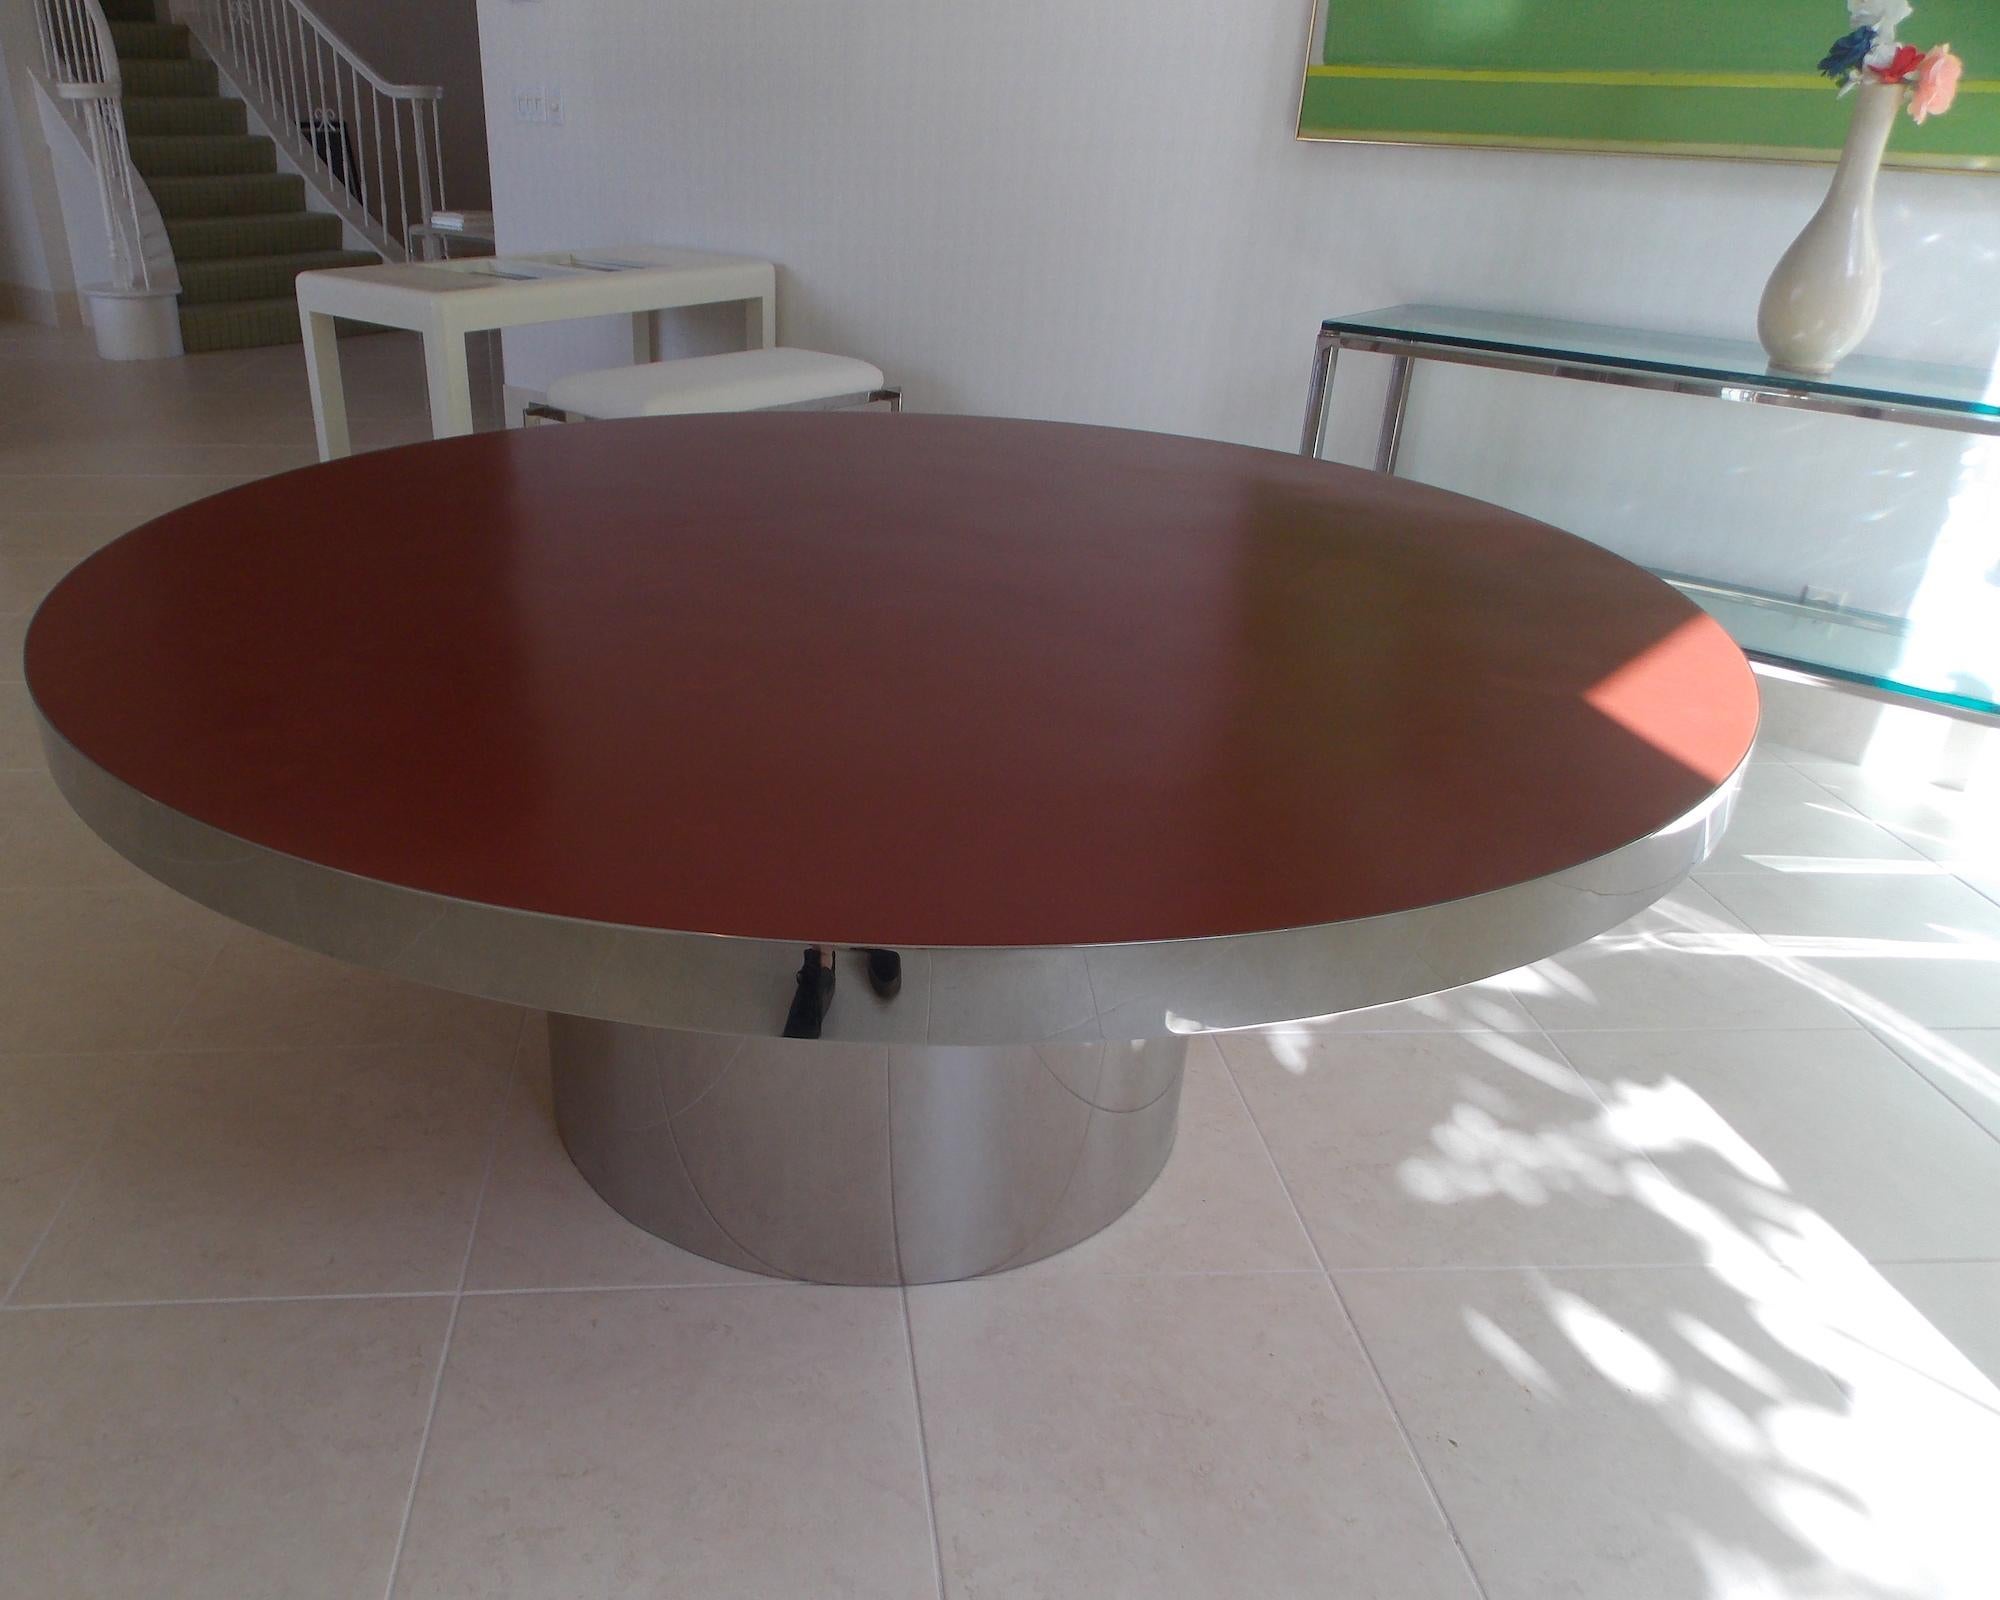 Karl Springer round custom dining table.
Polished Stainless Steel with a Oxblood Red Glasurite Top.
Glasurite is a Stone compound developed by Karl Springer.
Authenticated by Tom Langevin.